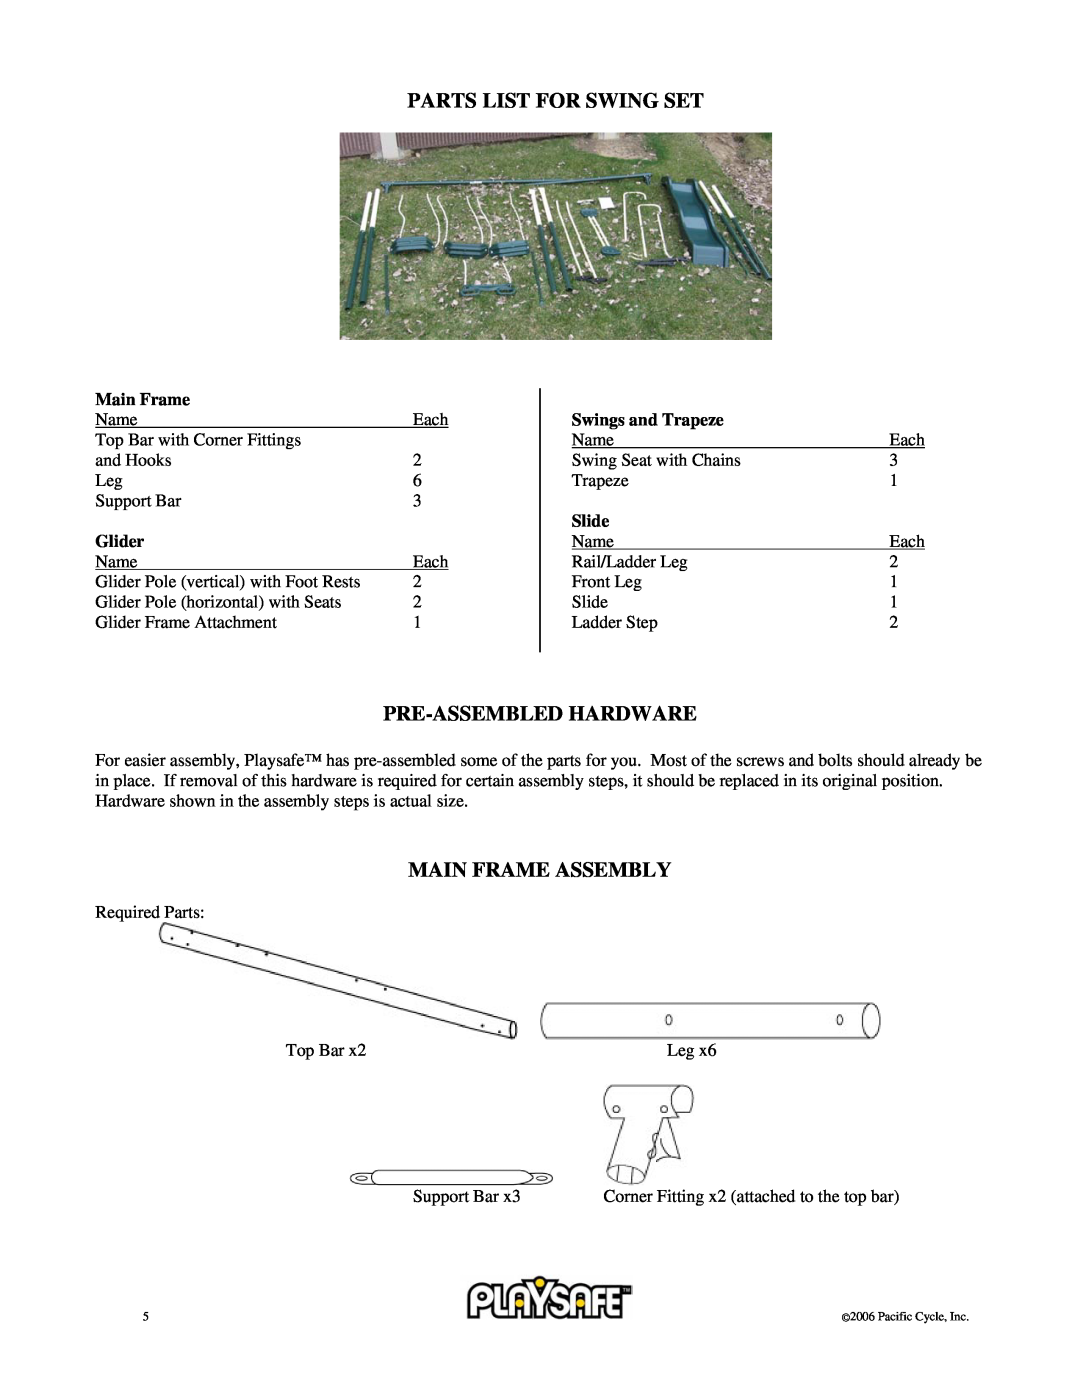 Pacific Cycle 22-PS245 Parts List For Swing Set, Pre-Assembledhardware, Main Frame Assembly, Glider, Swings and Trapeze 